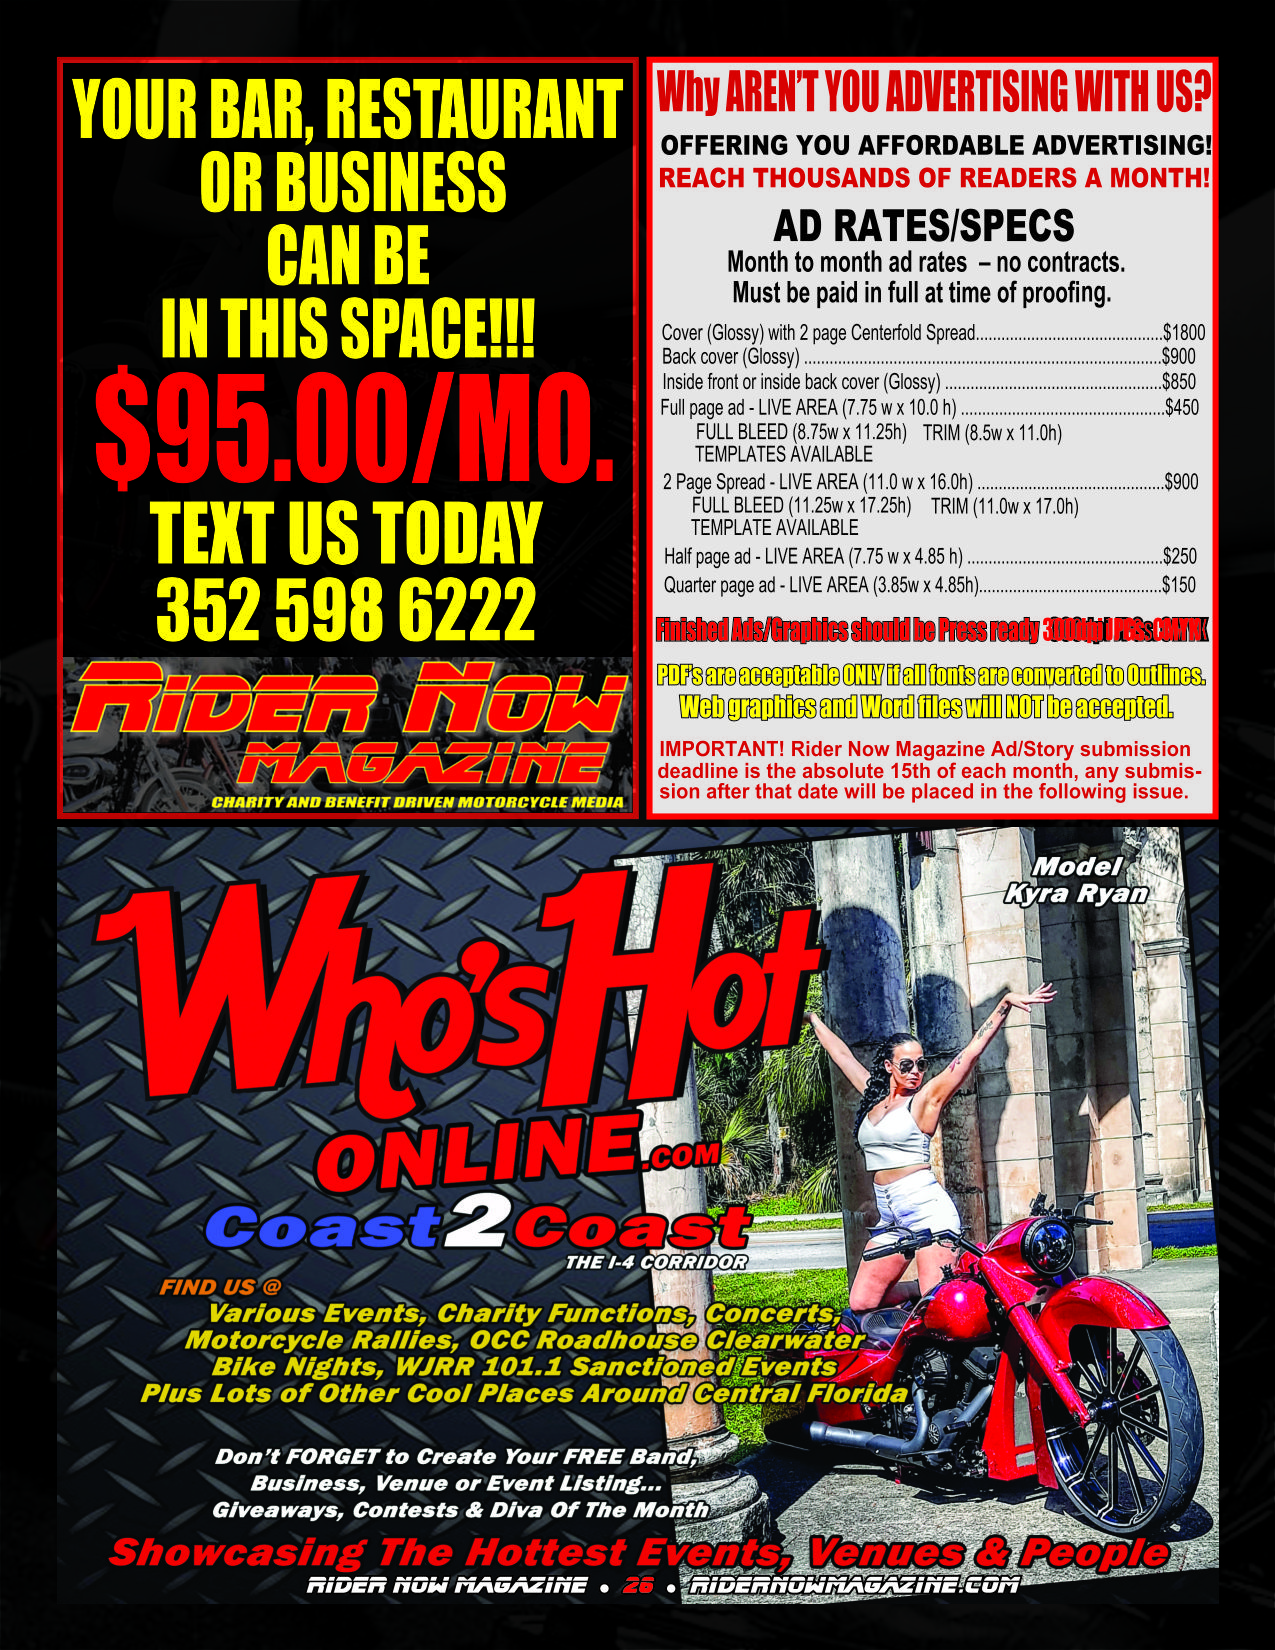 Rider Now Ad Rates and Ad Special + Who's Hot On-Line